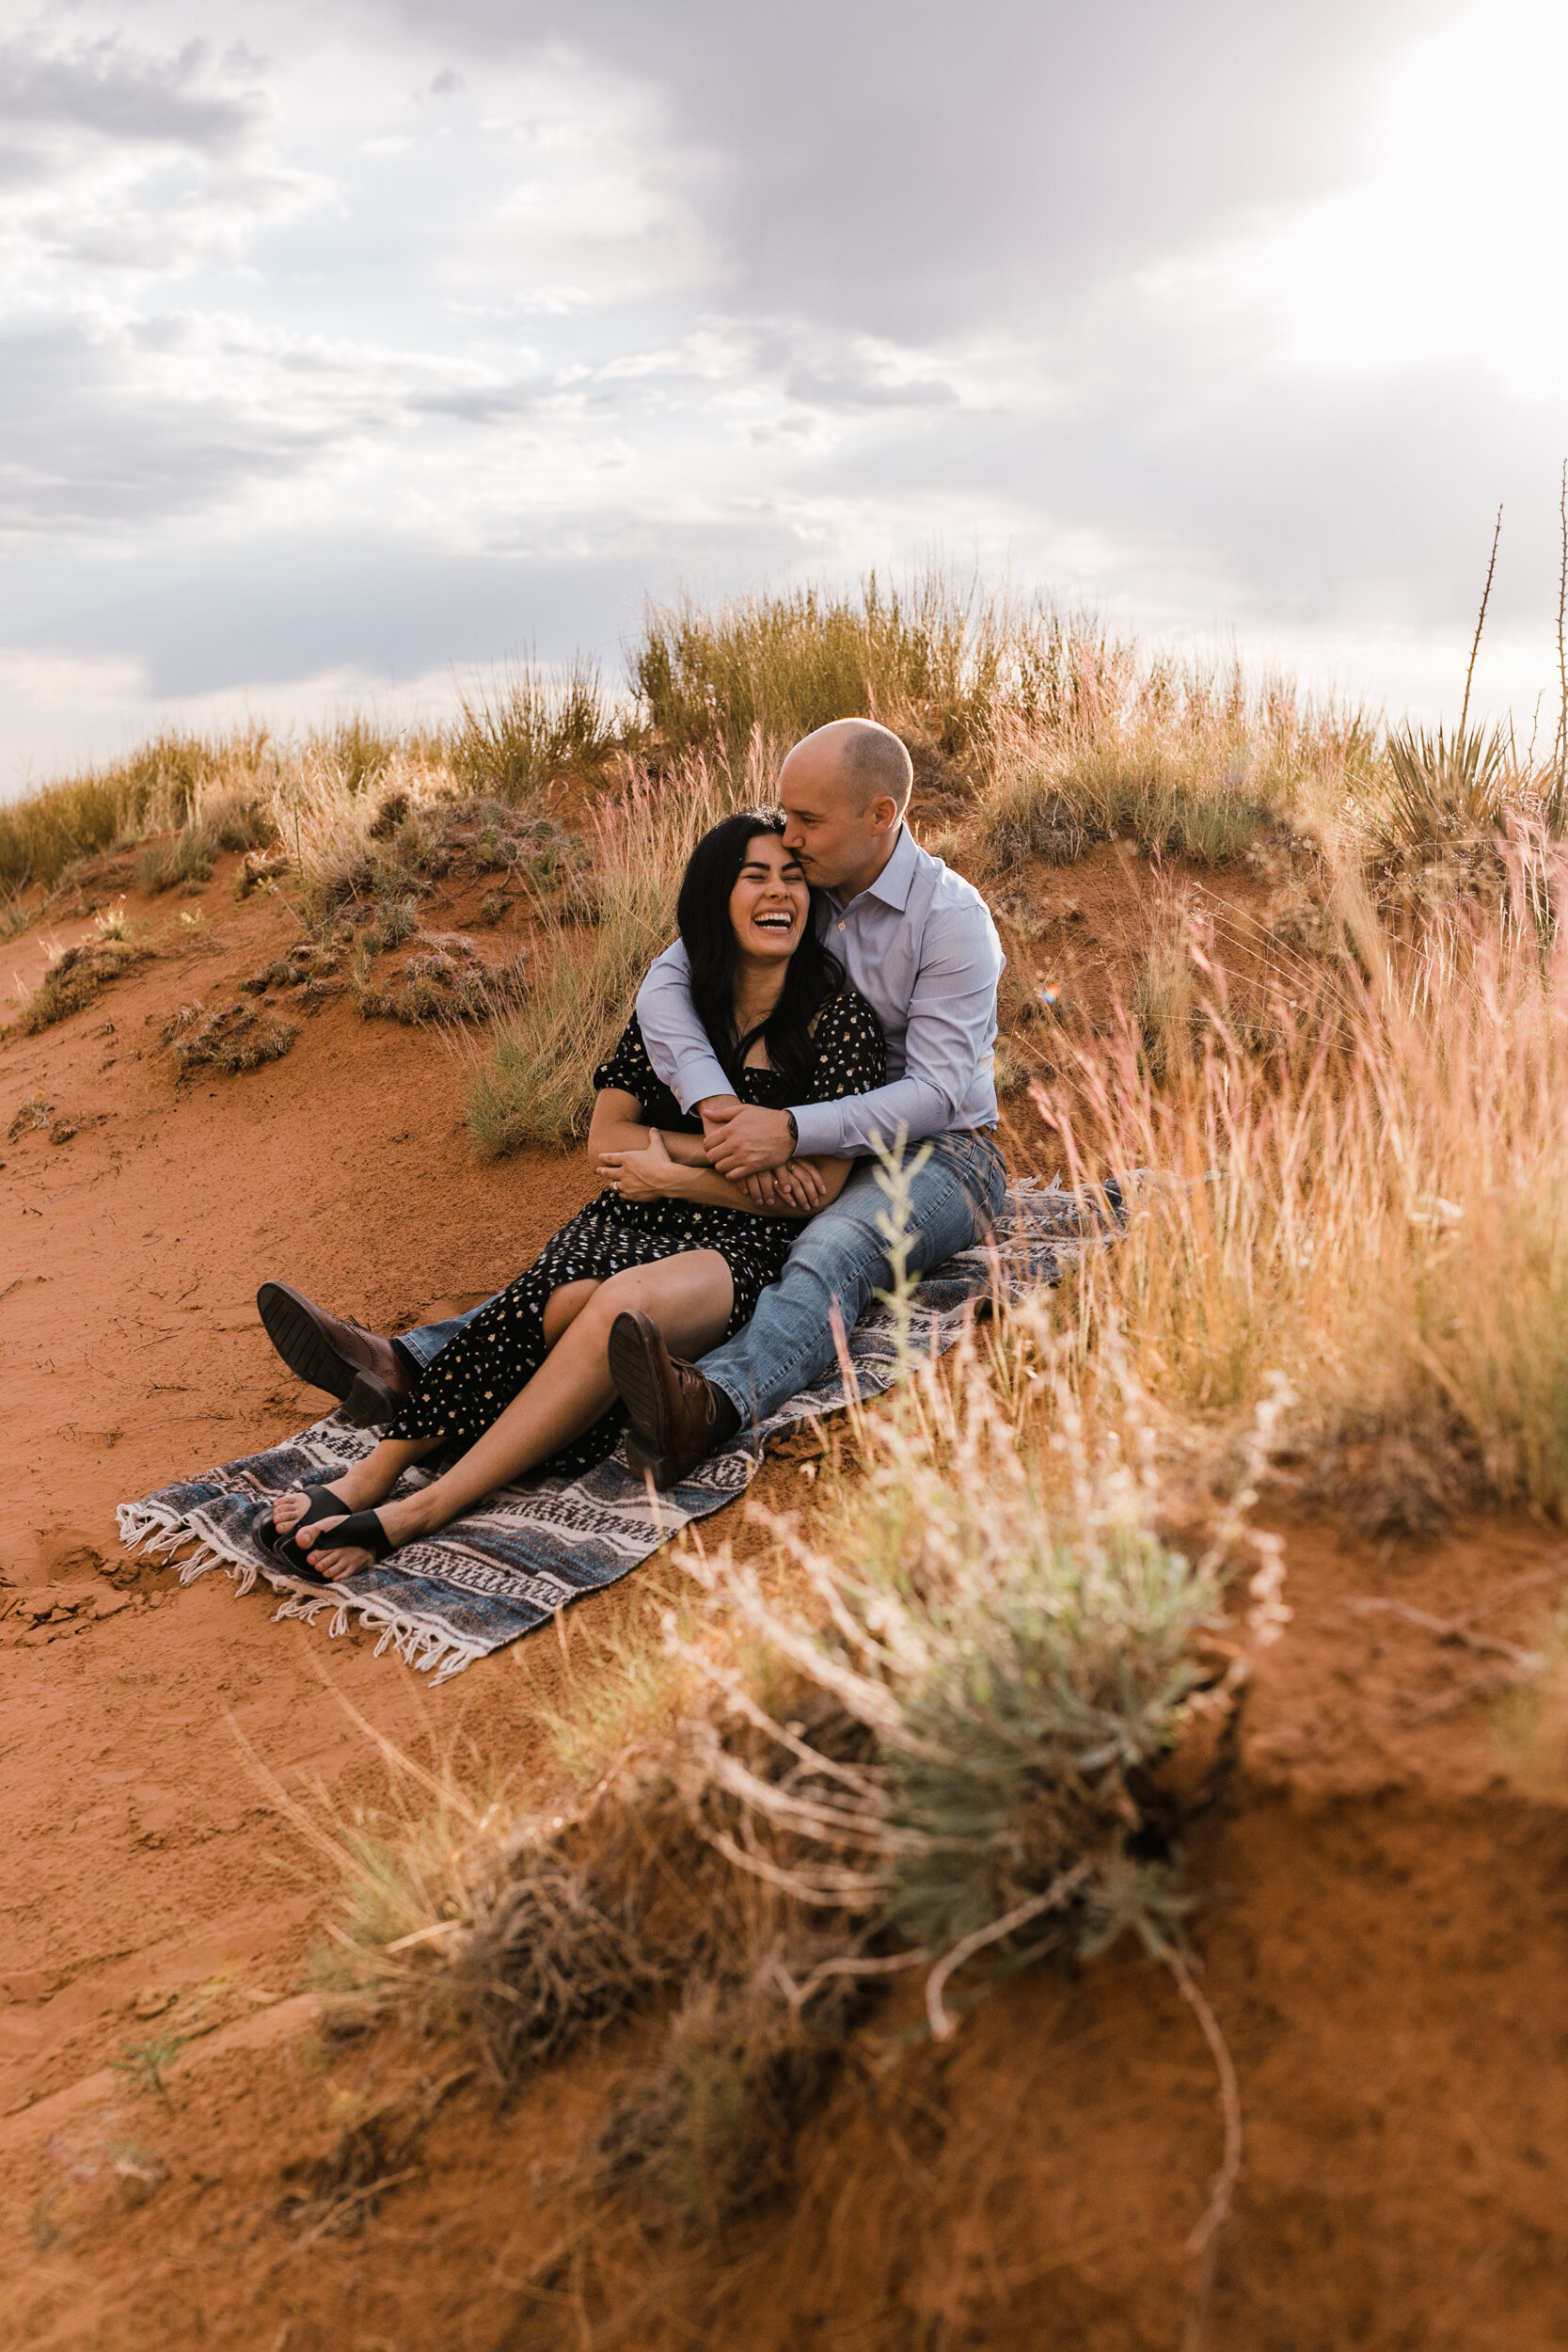 kimi + brett’s sunrise engagement photos in Moab, Utah with their dogs | utah elopement photographers | the hearnes adventure photography